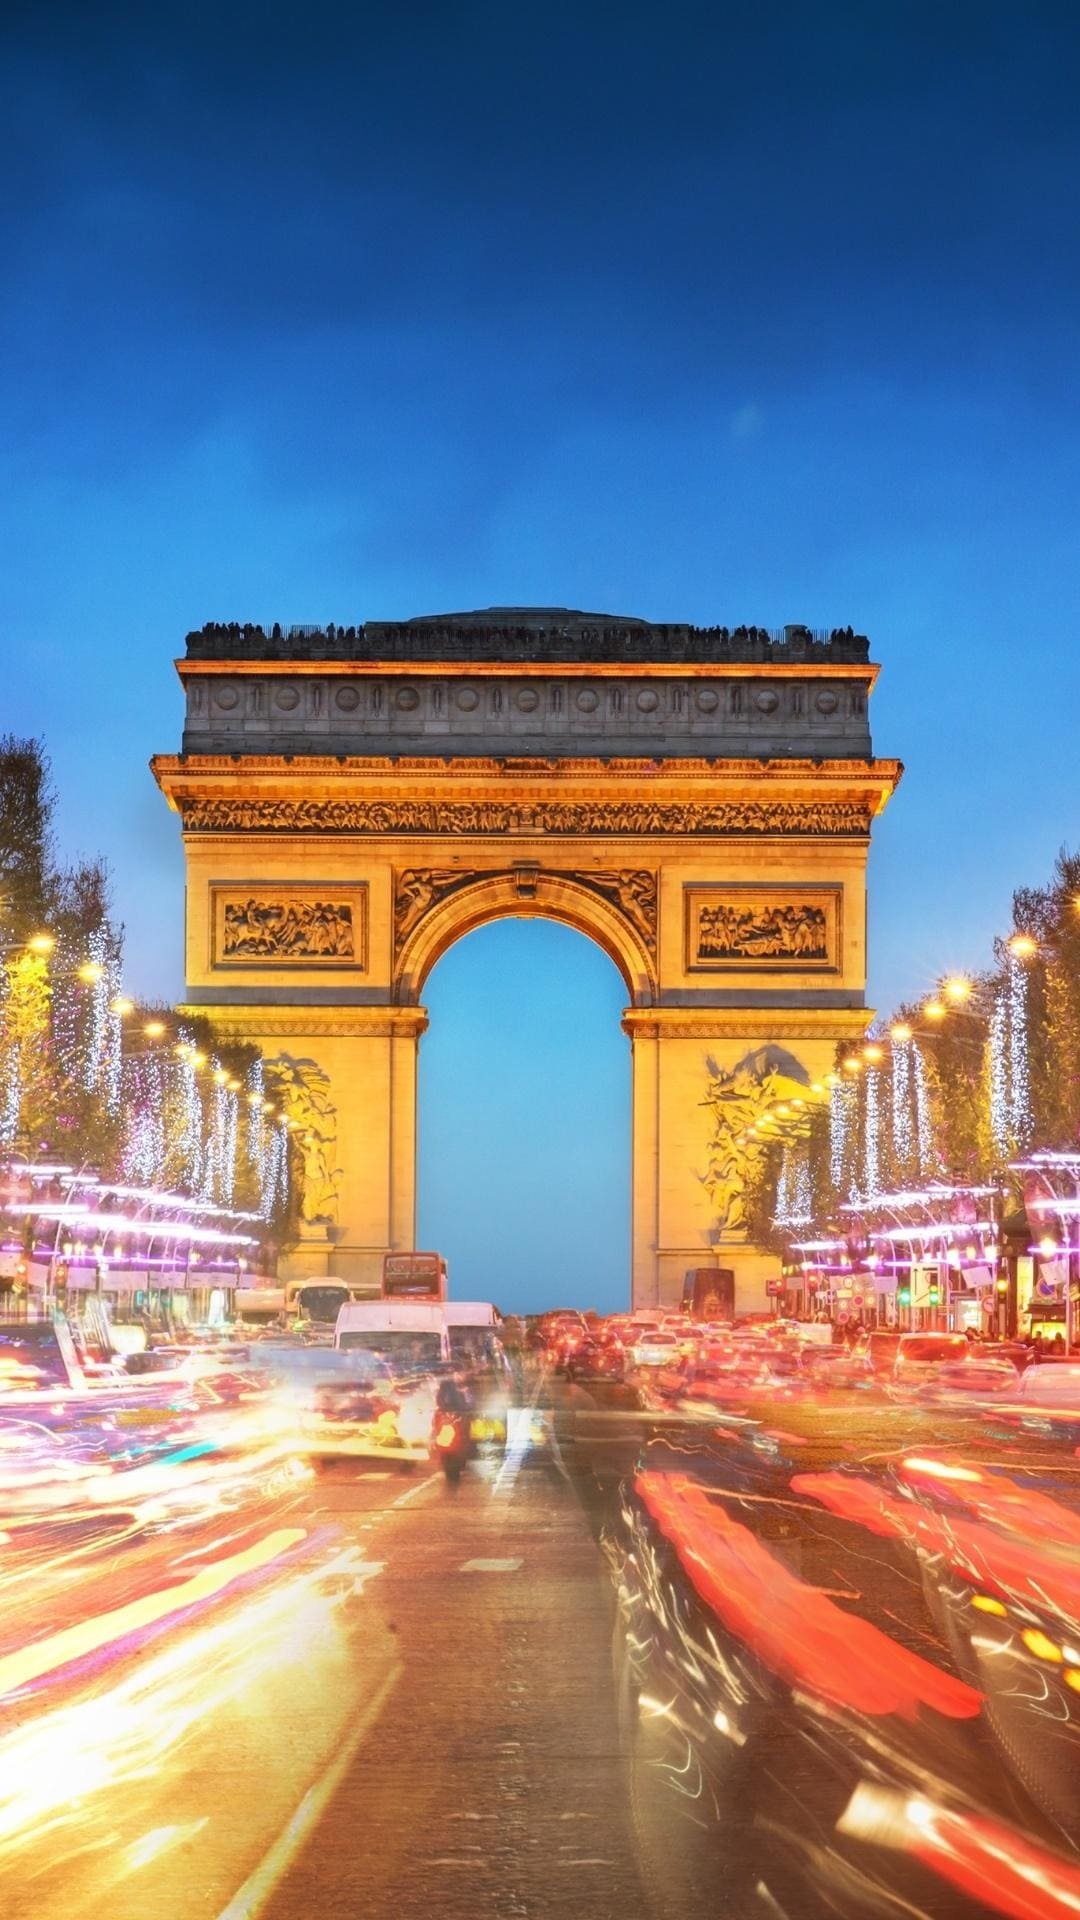 Arc de Triomphe, High quality wallpapers, Stunning images, French heritage, 1080x1920 Full HD Handy